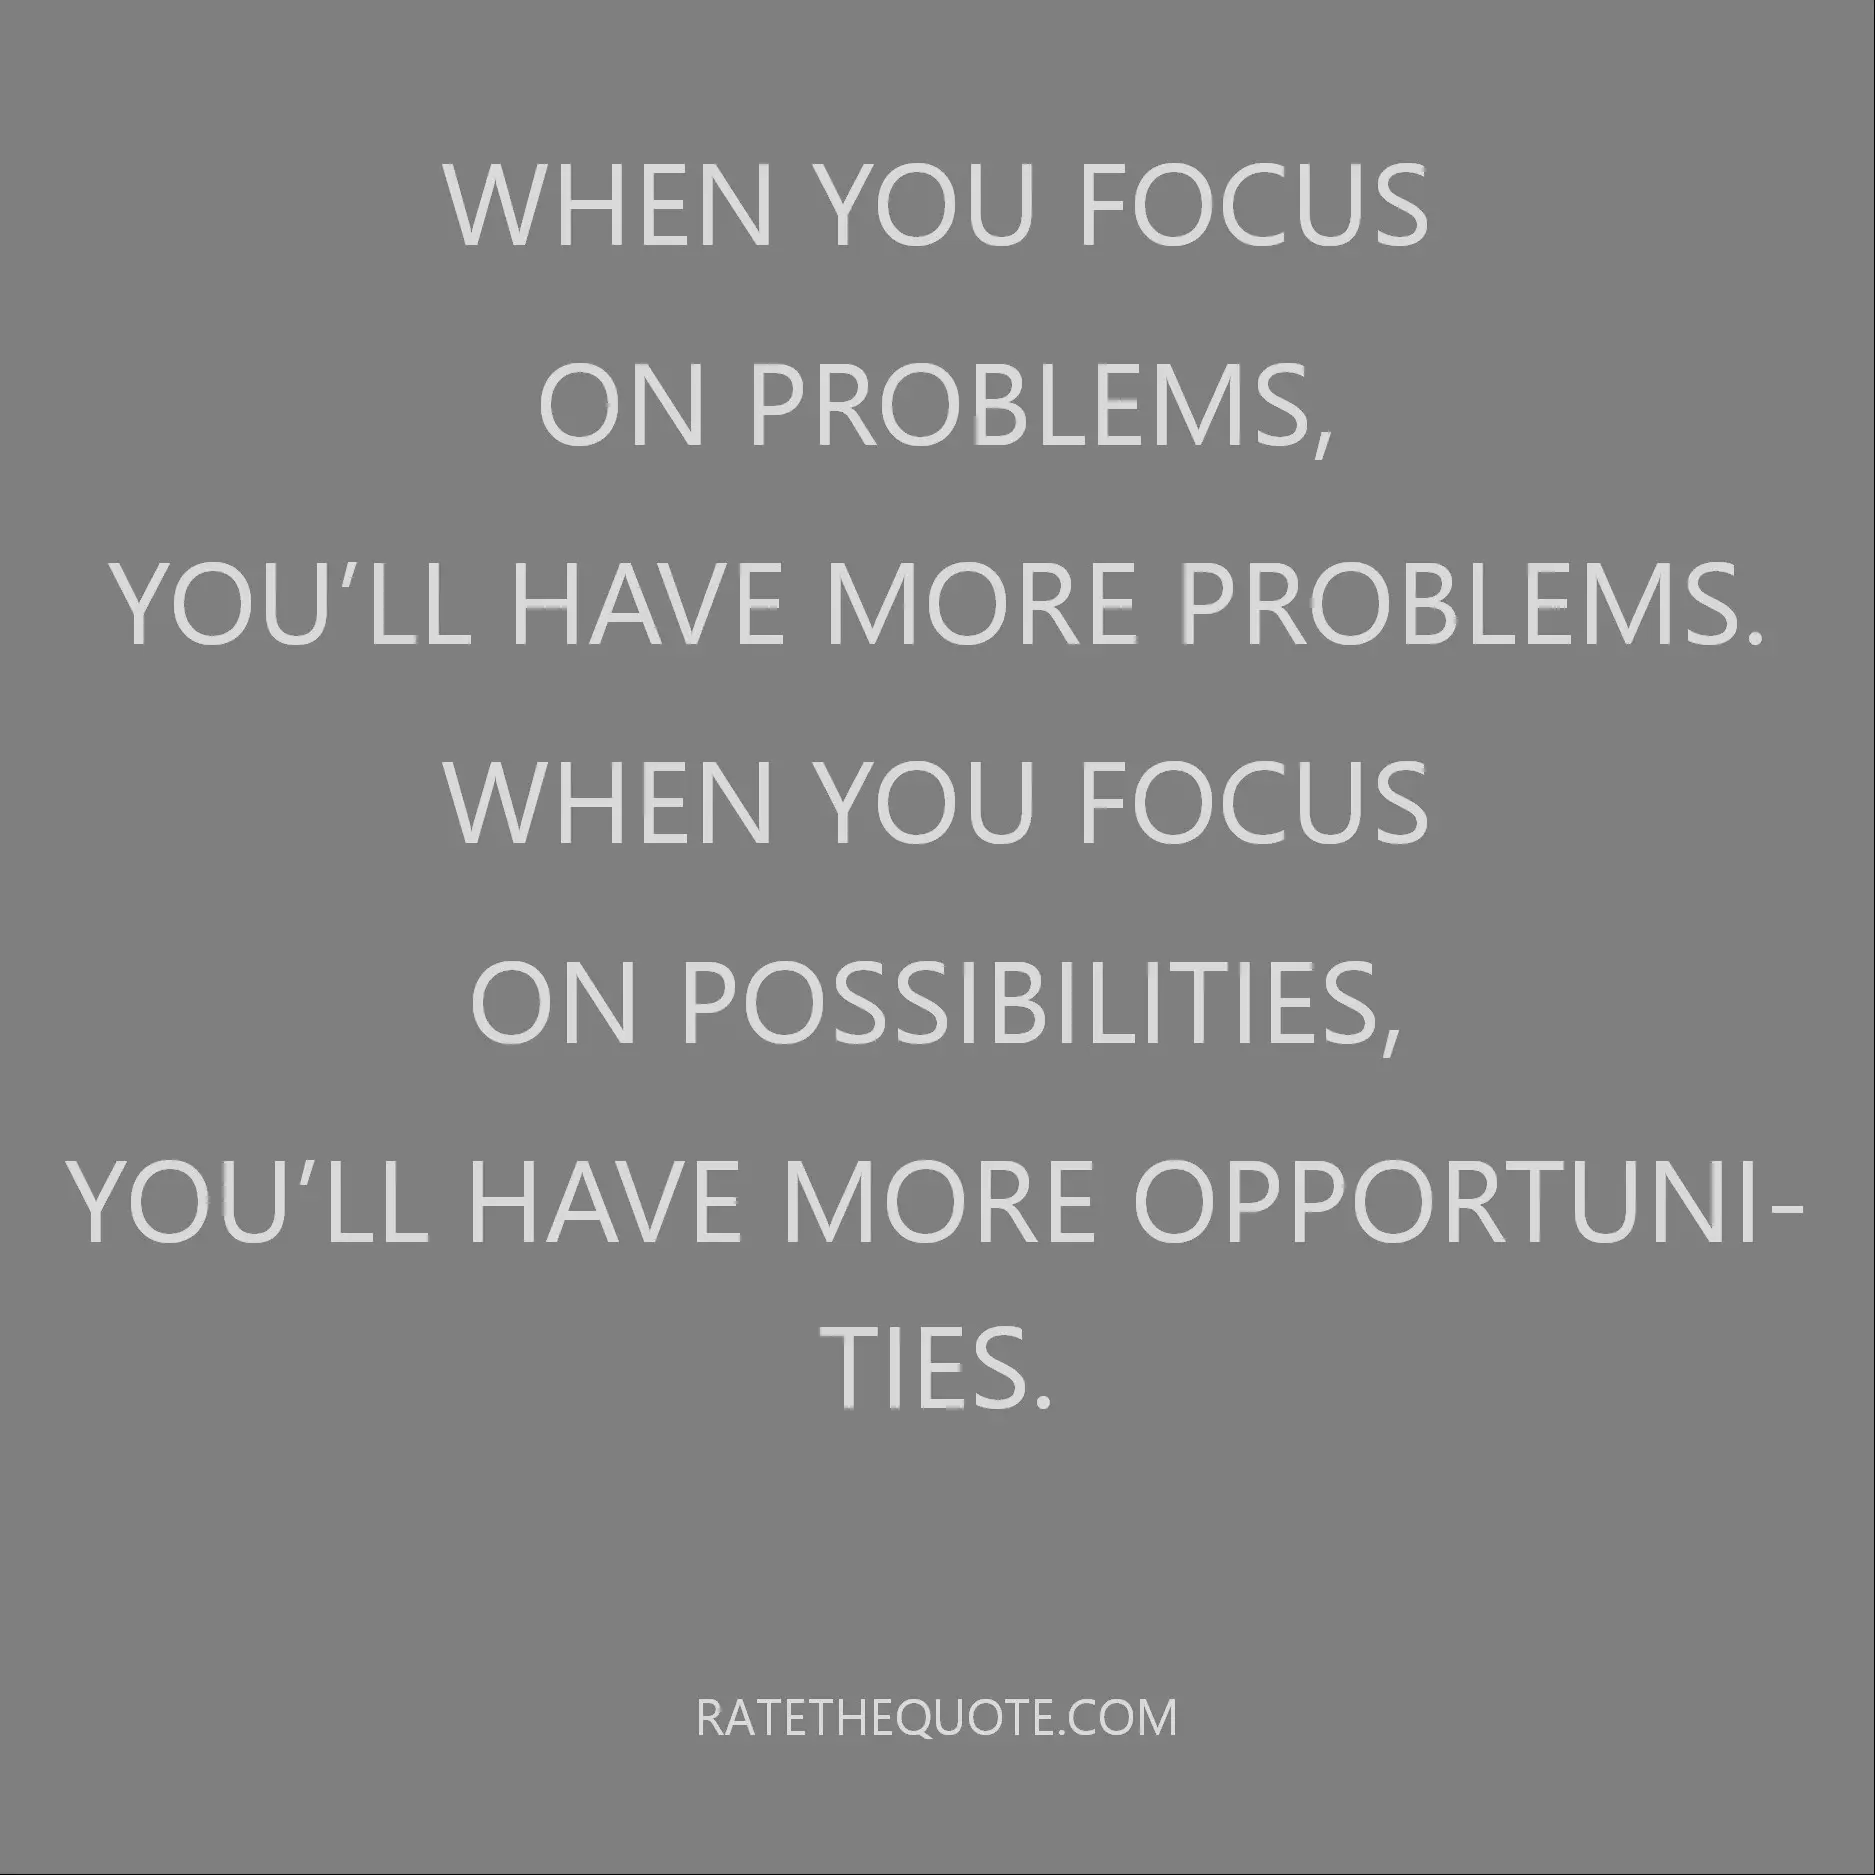 Quote When you focus on problems, you’ll have more problems. When you focus on possibilities, you’ll have more opportunities.